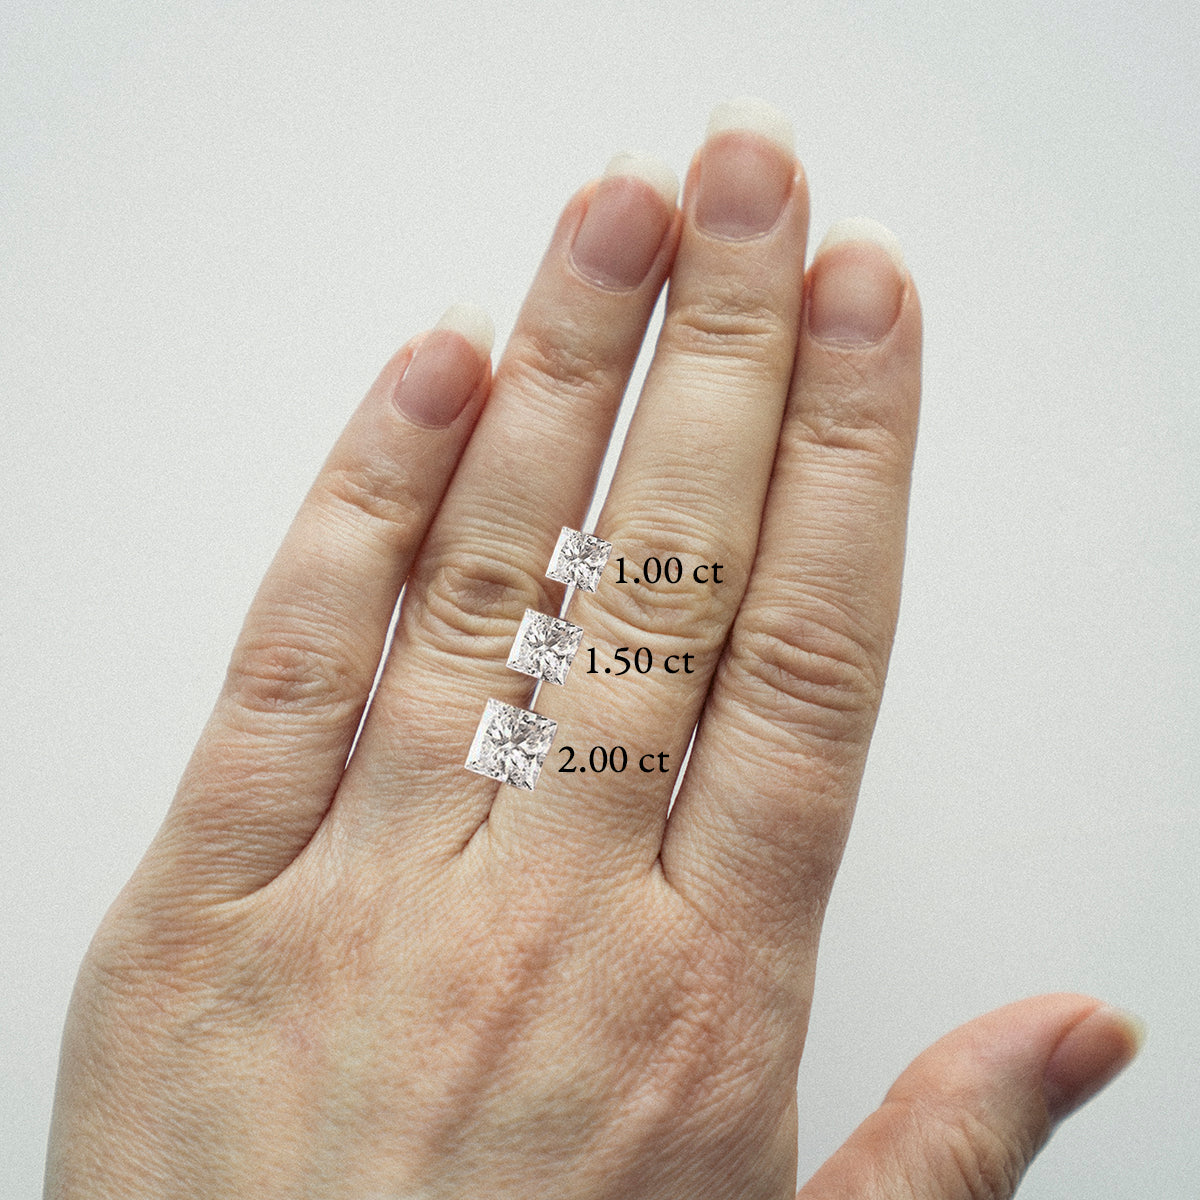 Aida Unique Ring in 14k Gold set with a square cut lab-grown diamond and two baguette cute lab-grown diamonds By SHW Fine Jewelry NYC